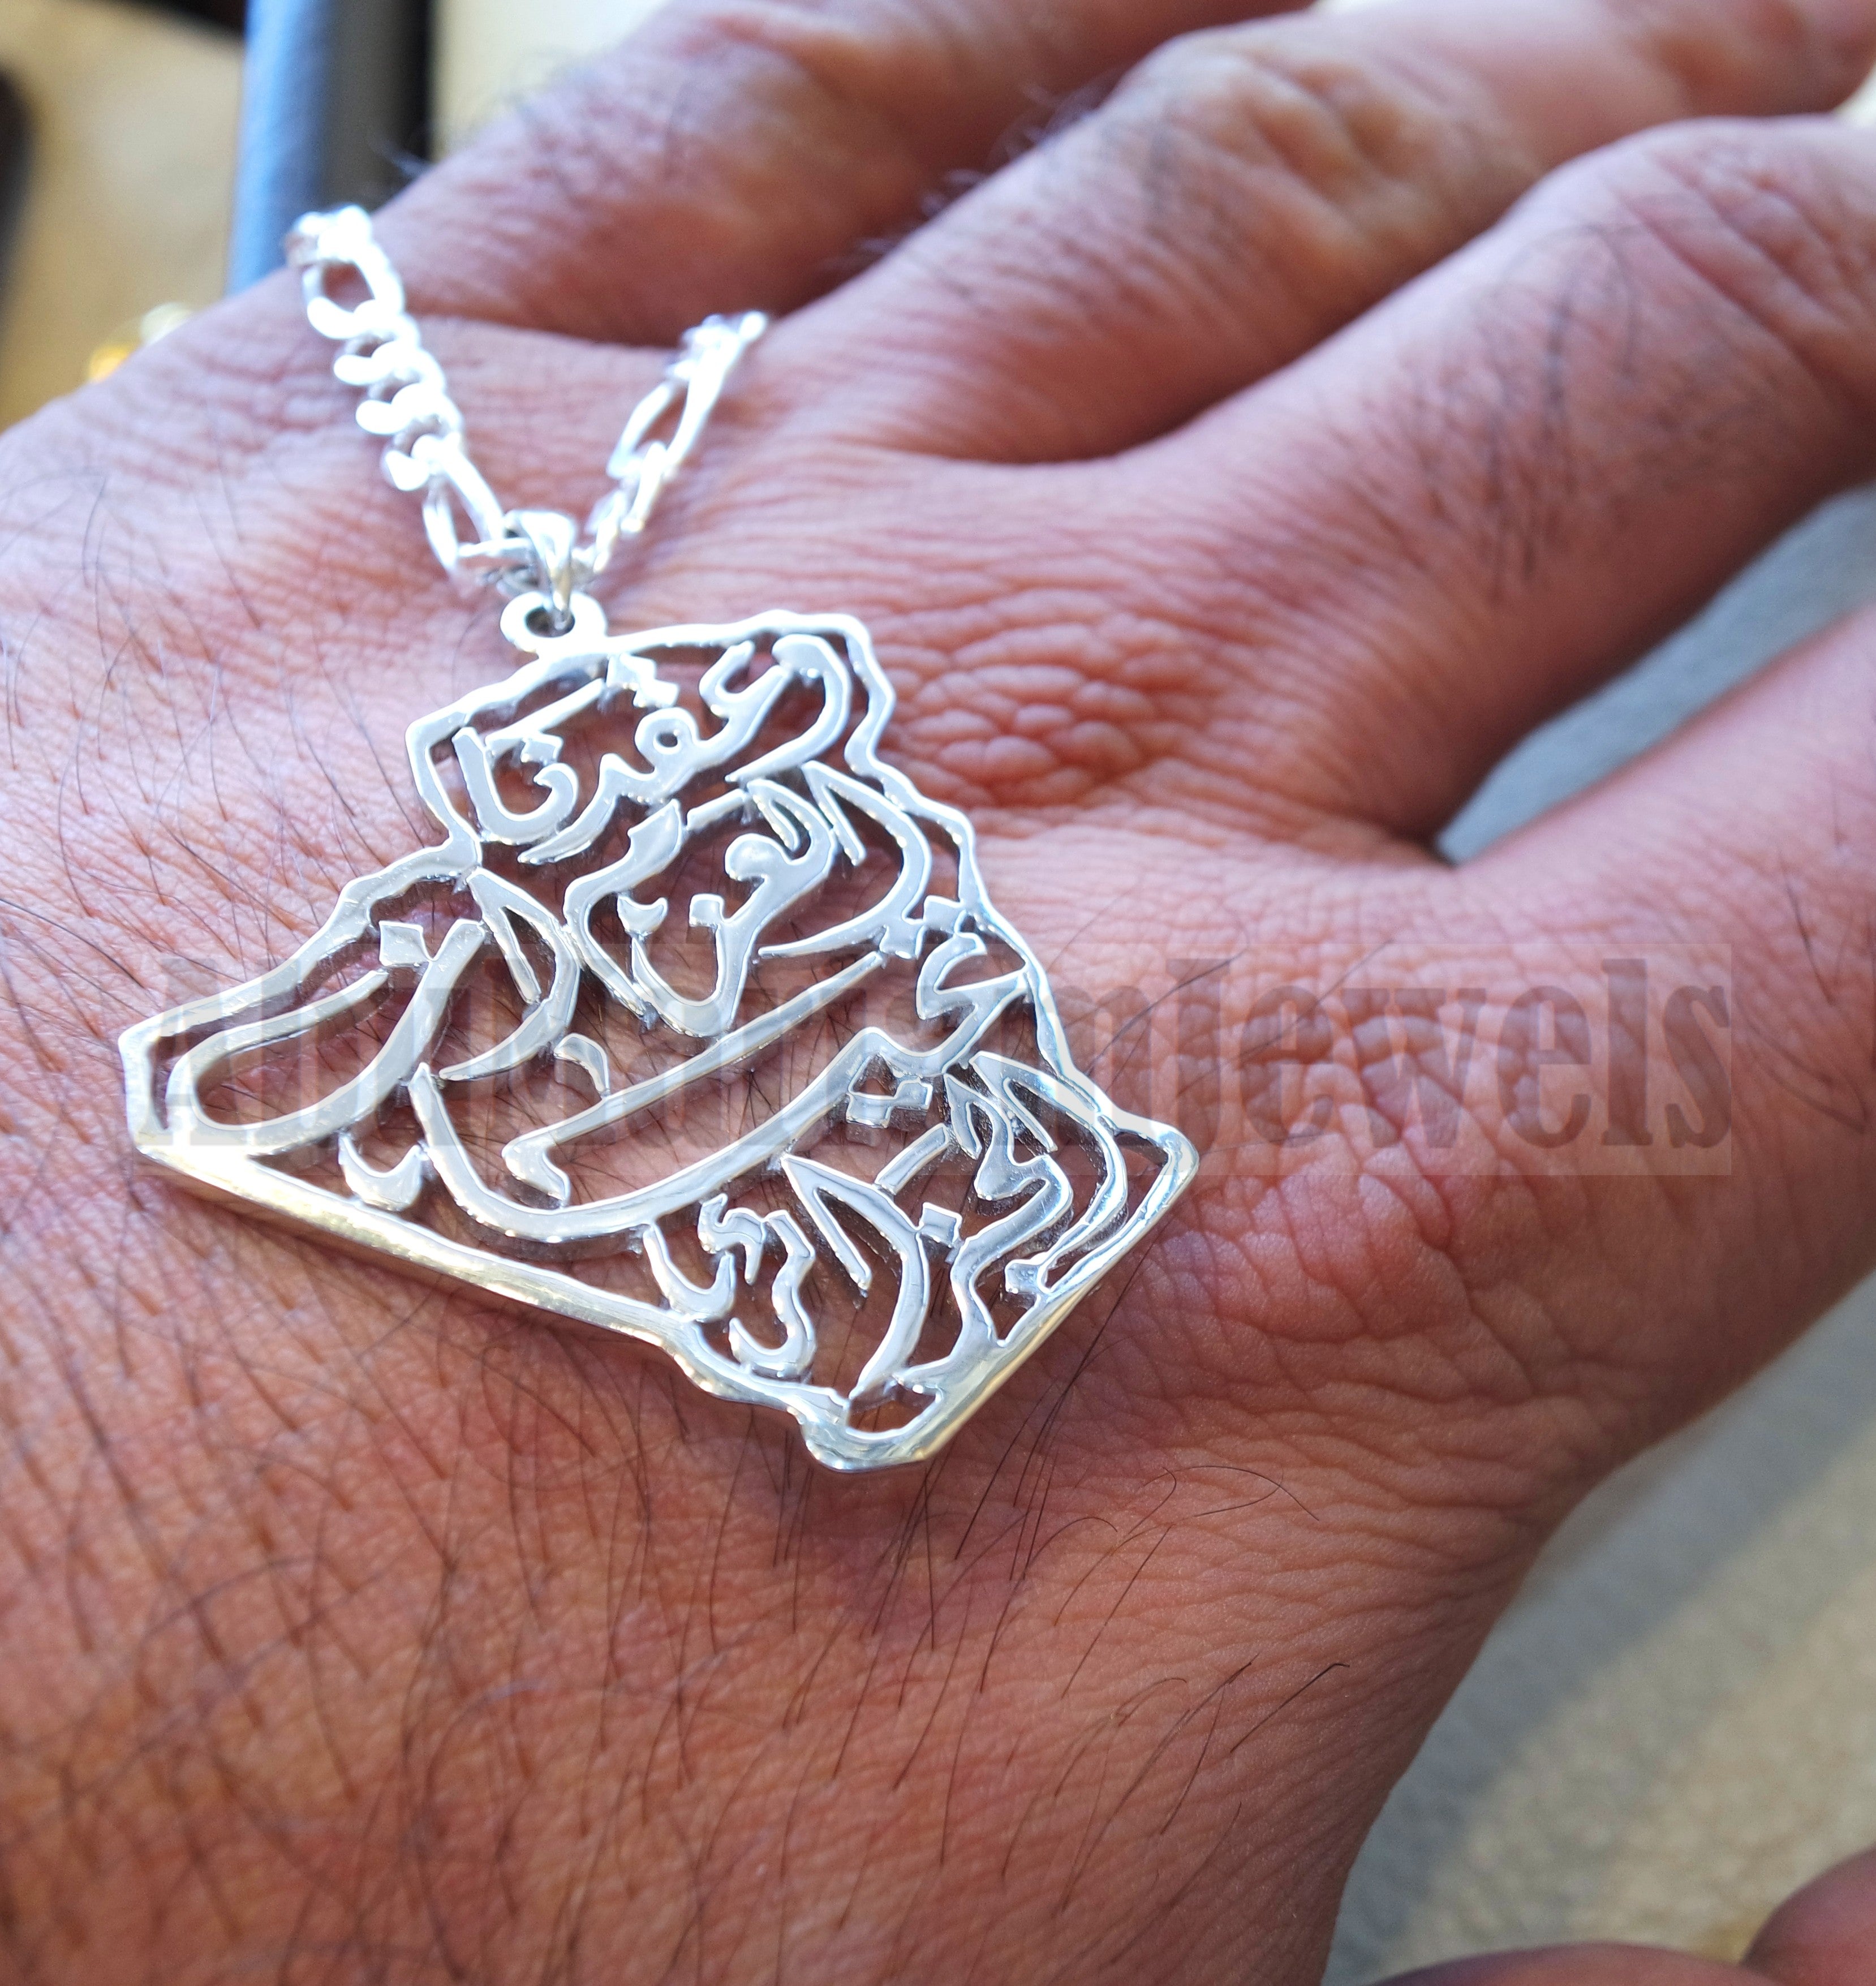 Algeria map Carte de l'Algérie pendant with thick chain famous national anthem verse sterling silver 925 jewelry Arabic fast shipping خريطة الجزائر